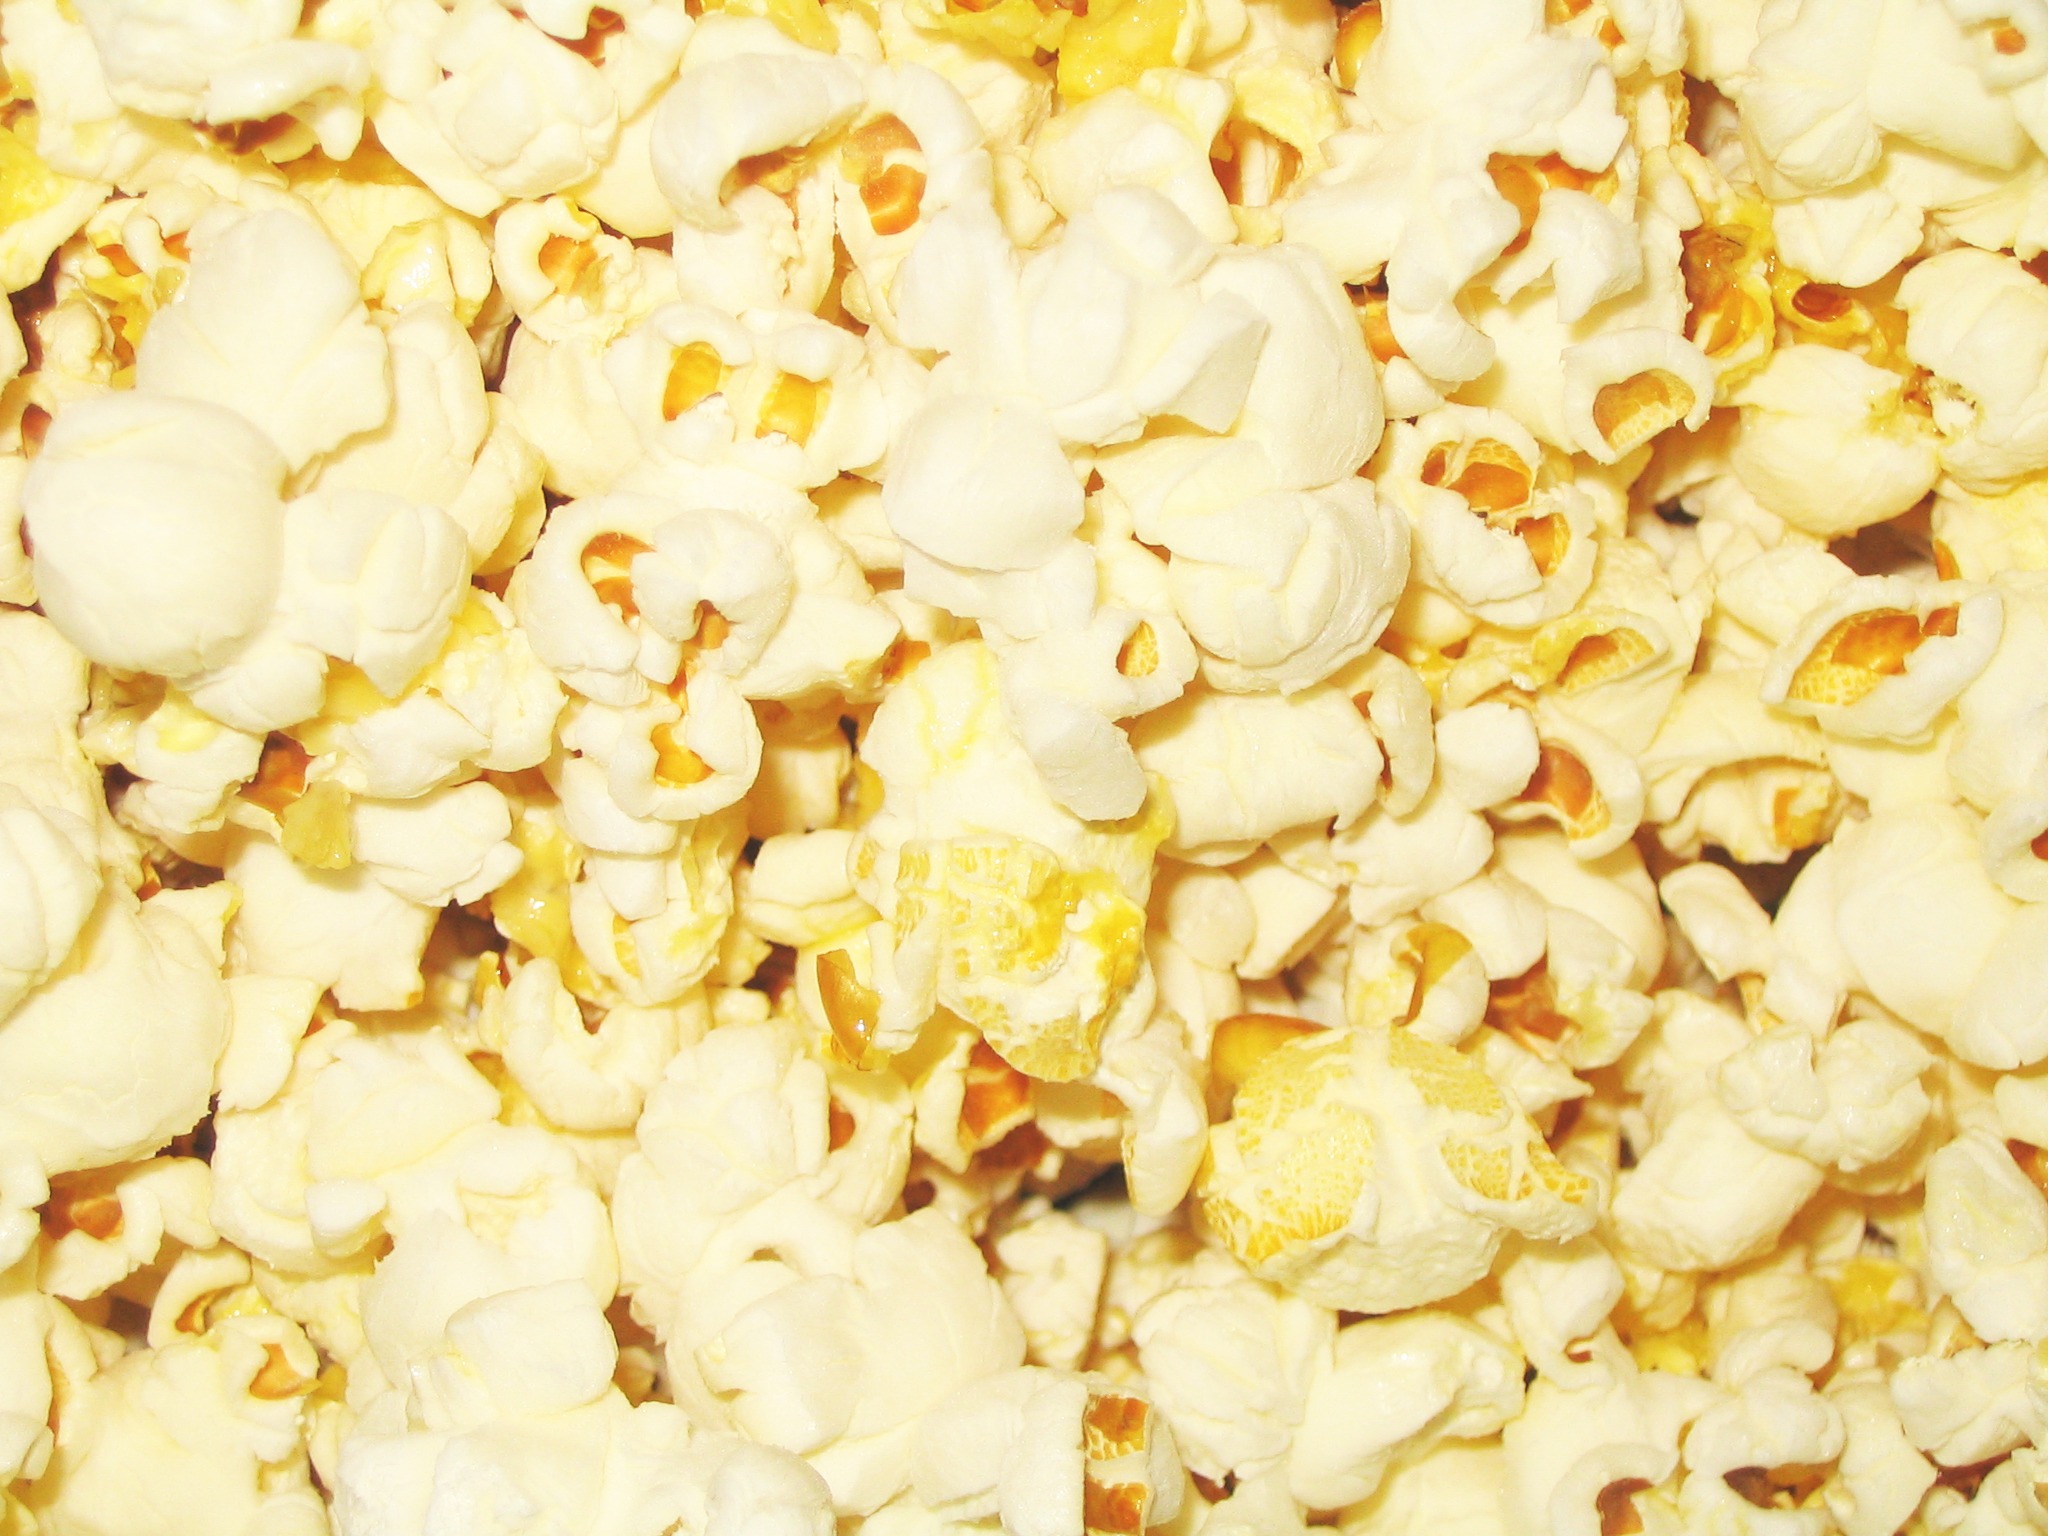 Popcorn- more history than you would think